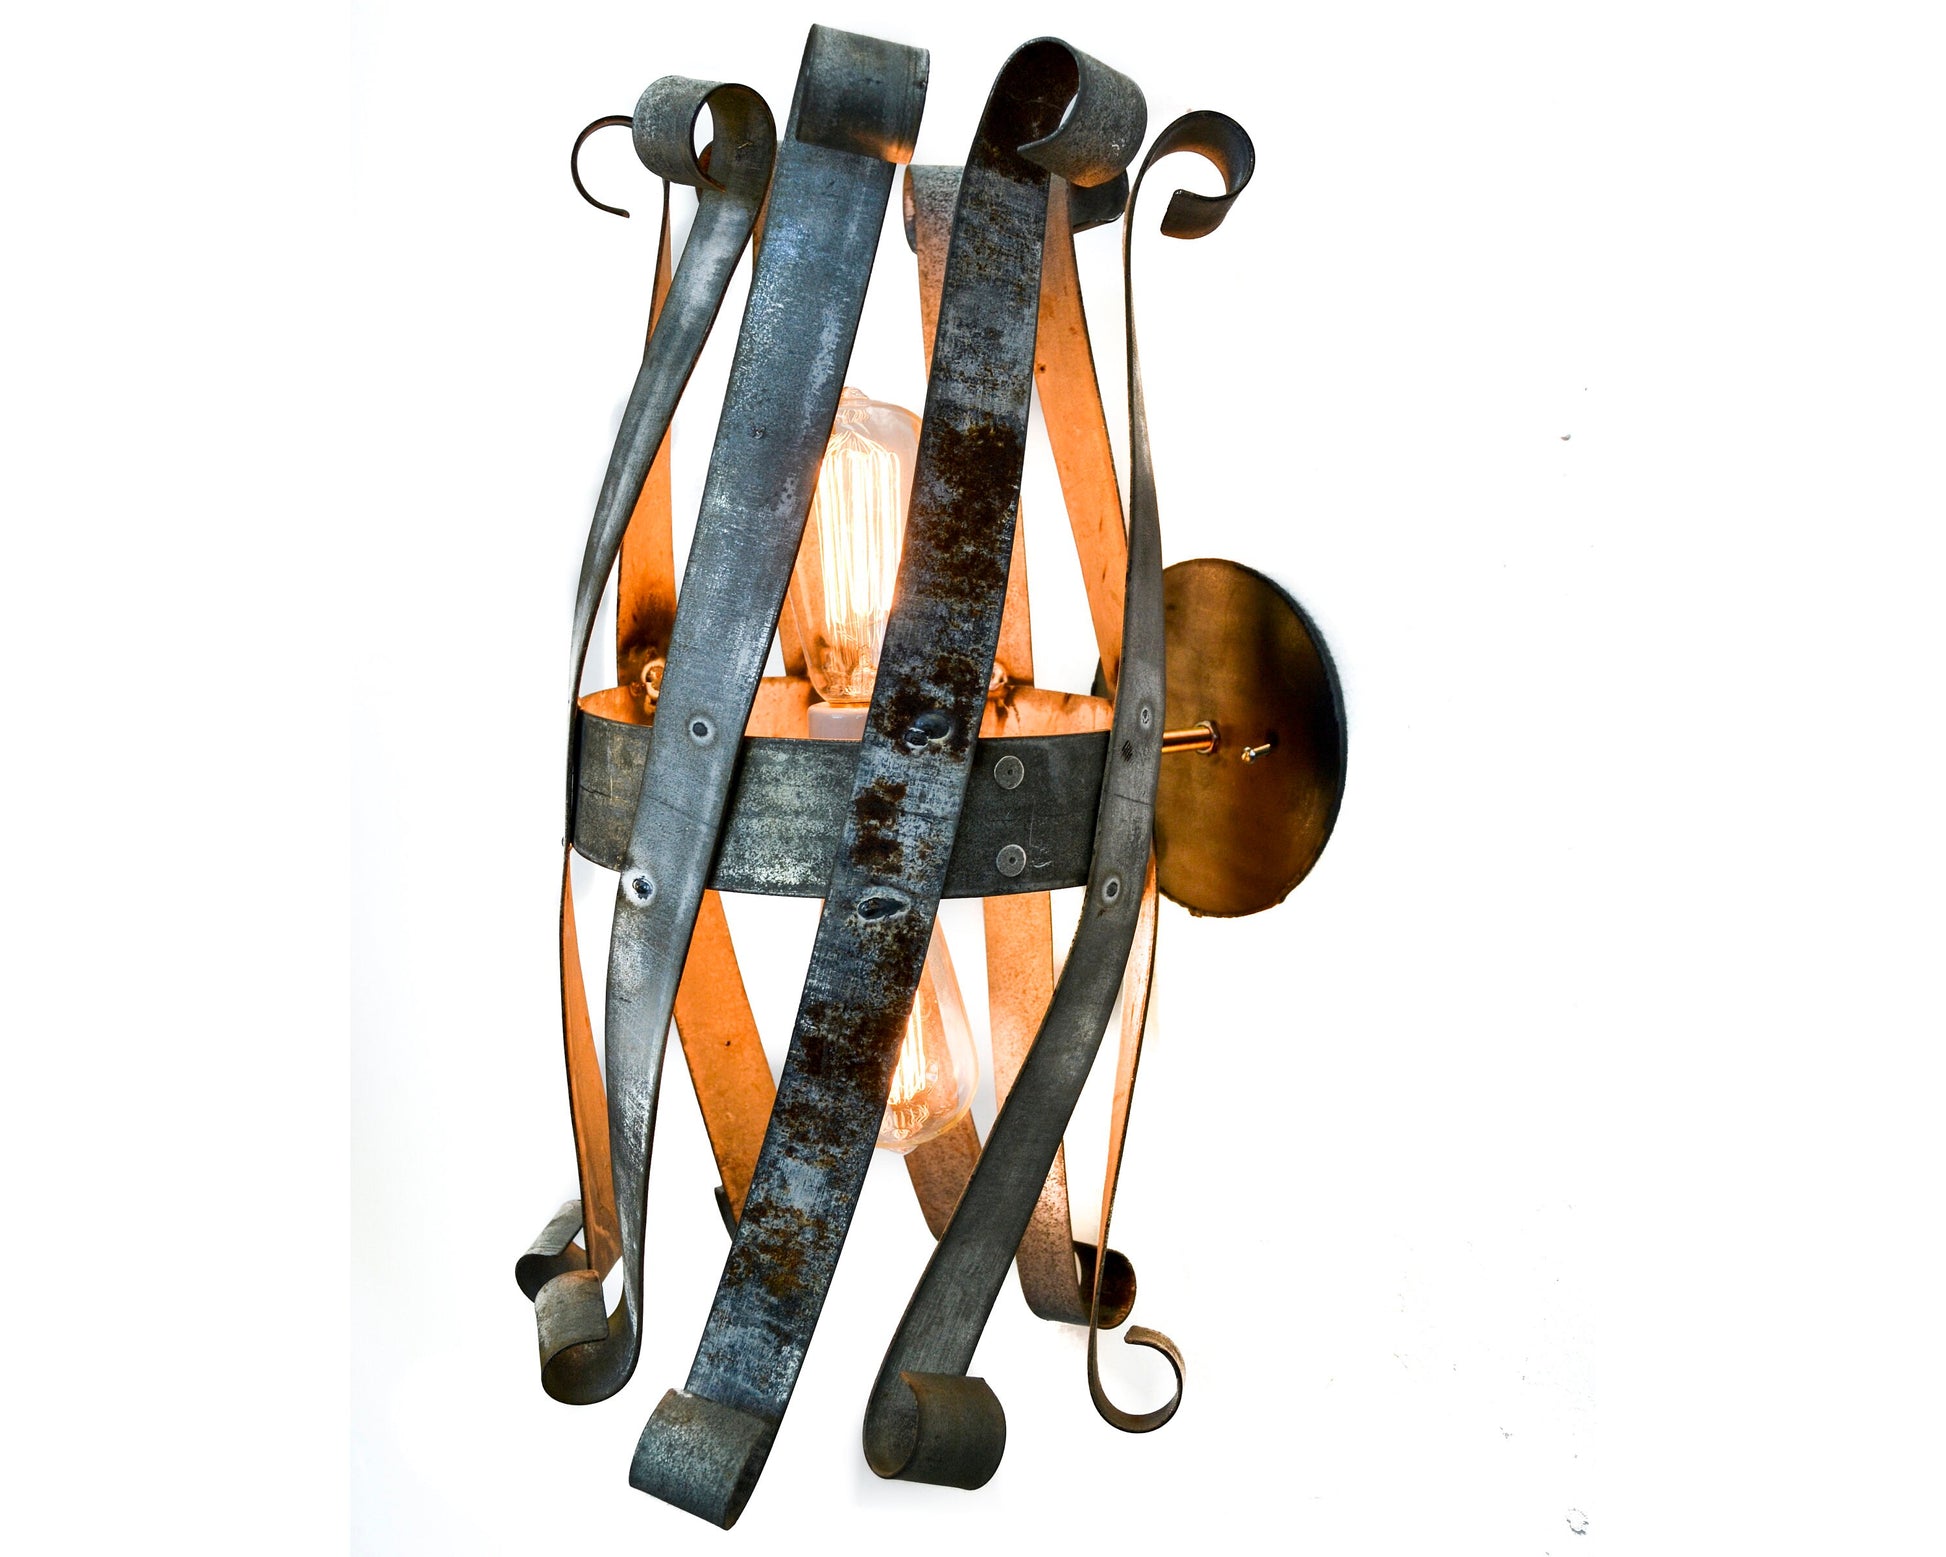 Wine Barrel Ring Double Wall Sconce - Double Twist - made from salvaged Napa wine barrel rings - 100% Recycled!